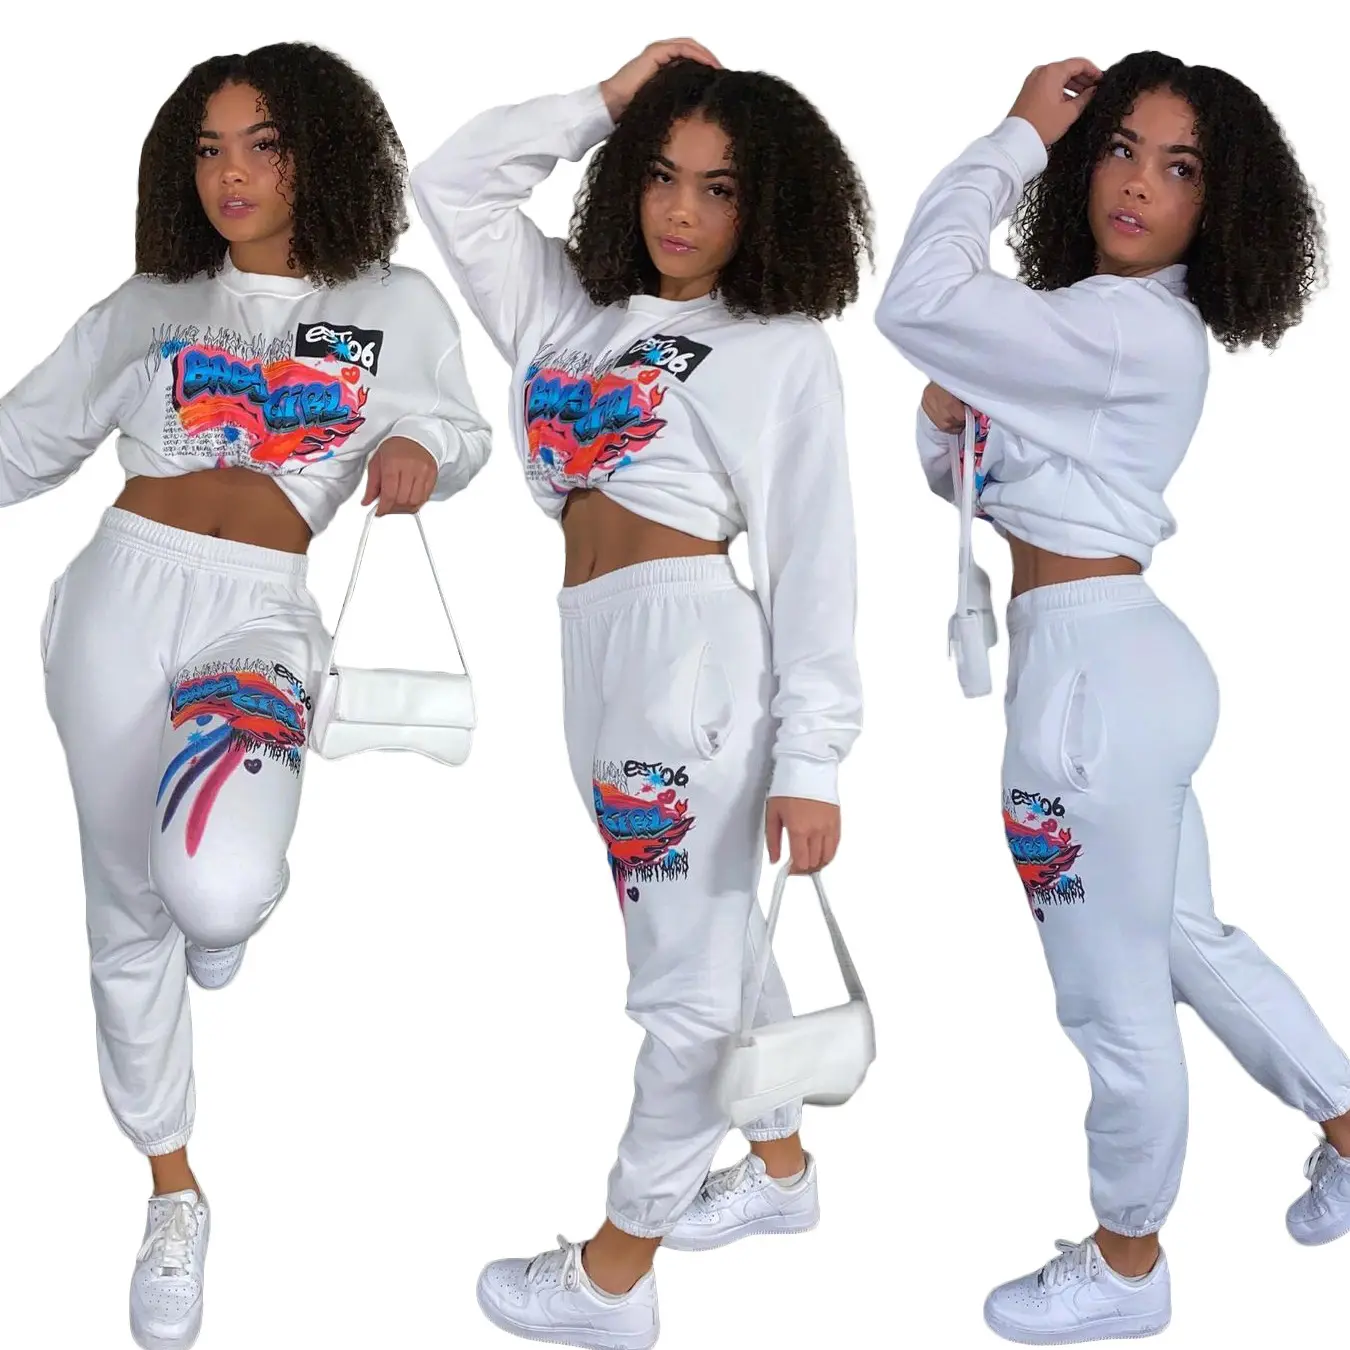 MSL8296-New Style Hot Sale Casual Fashion Printed Letters Loose Womens Clothing Two Piece Pants Set Women